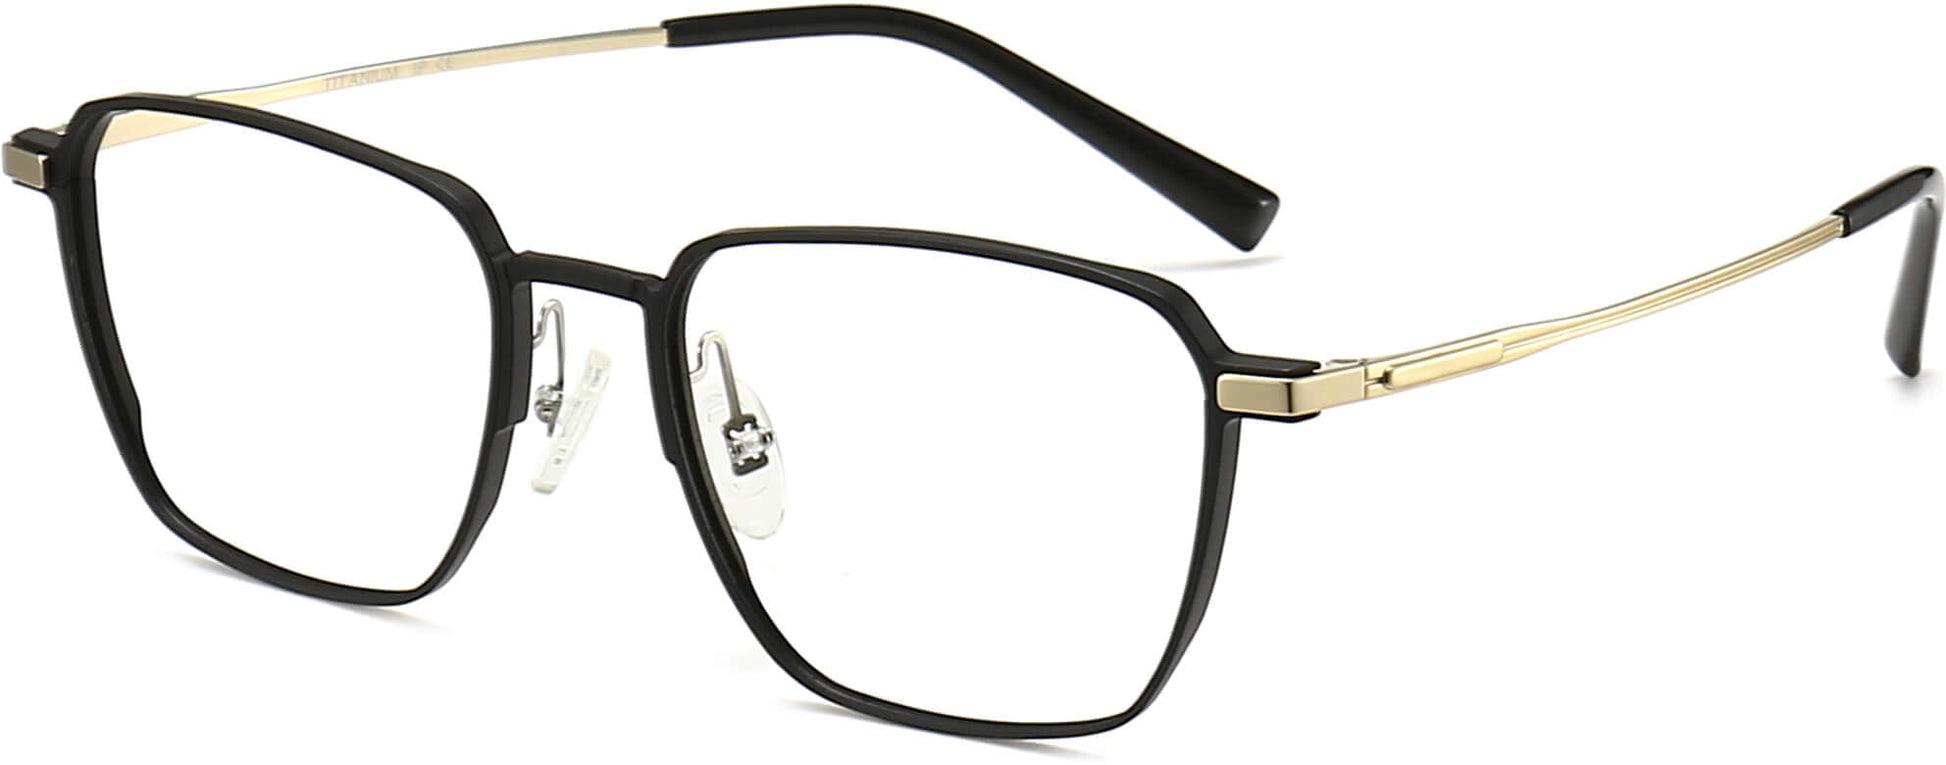 Colby Square Black Eyeglasses from ANRRI, angle view